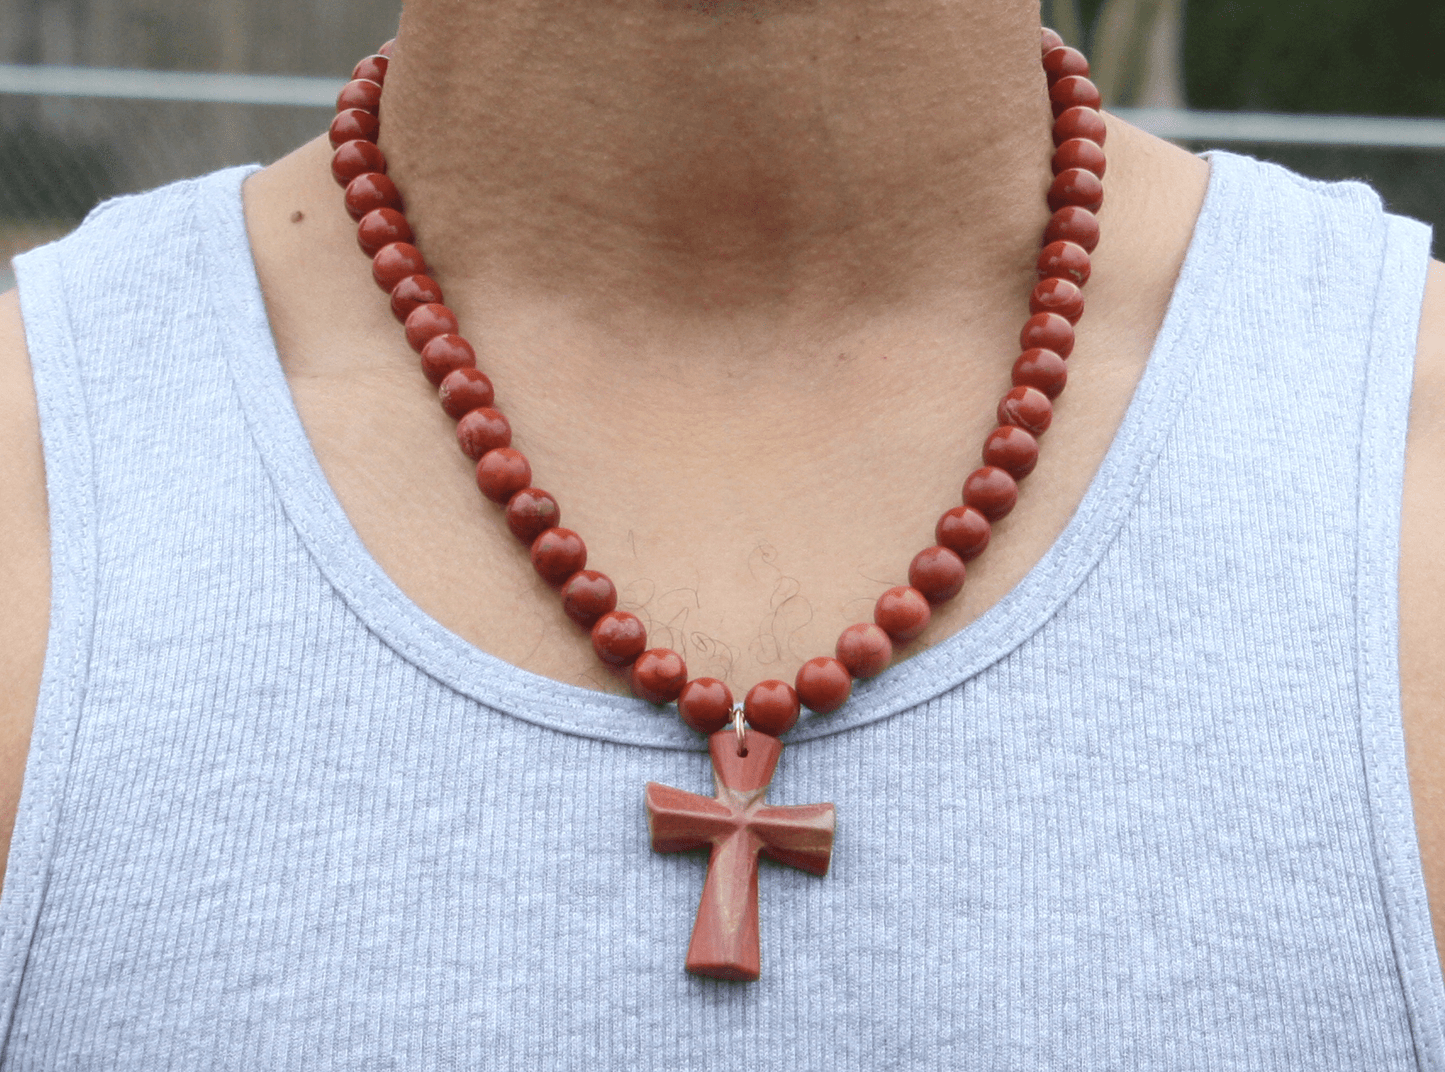 Genuine Red Jasper Necklace with Red Jasper Cross - Gift for Men/Woman - Spiritual Accessories - Religious Symbol